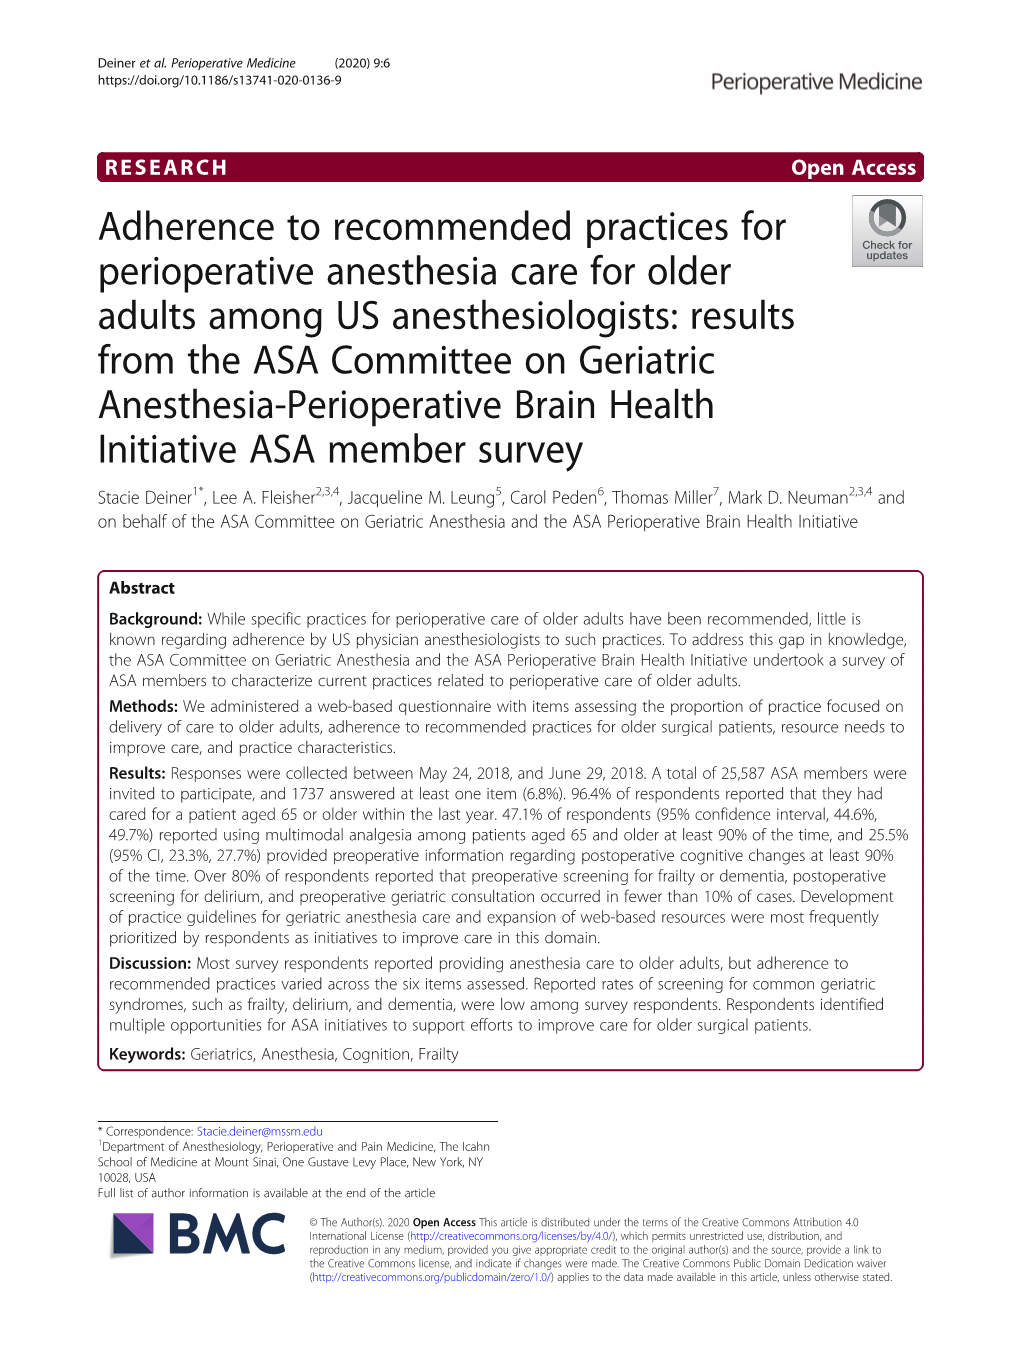 Adherence to Recommended Practices For